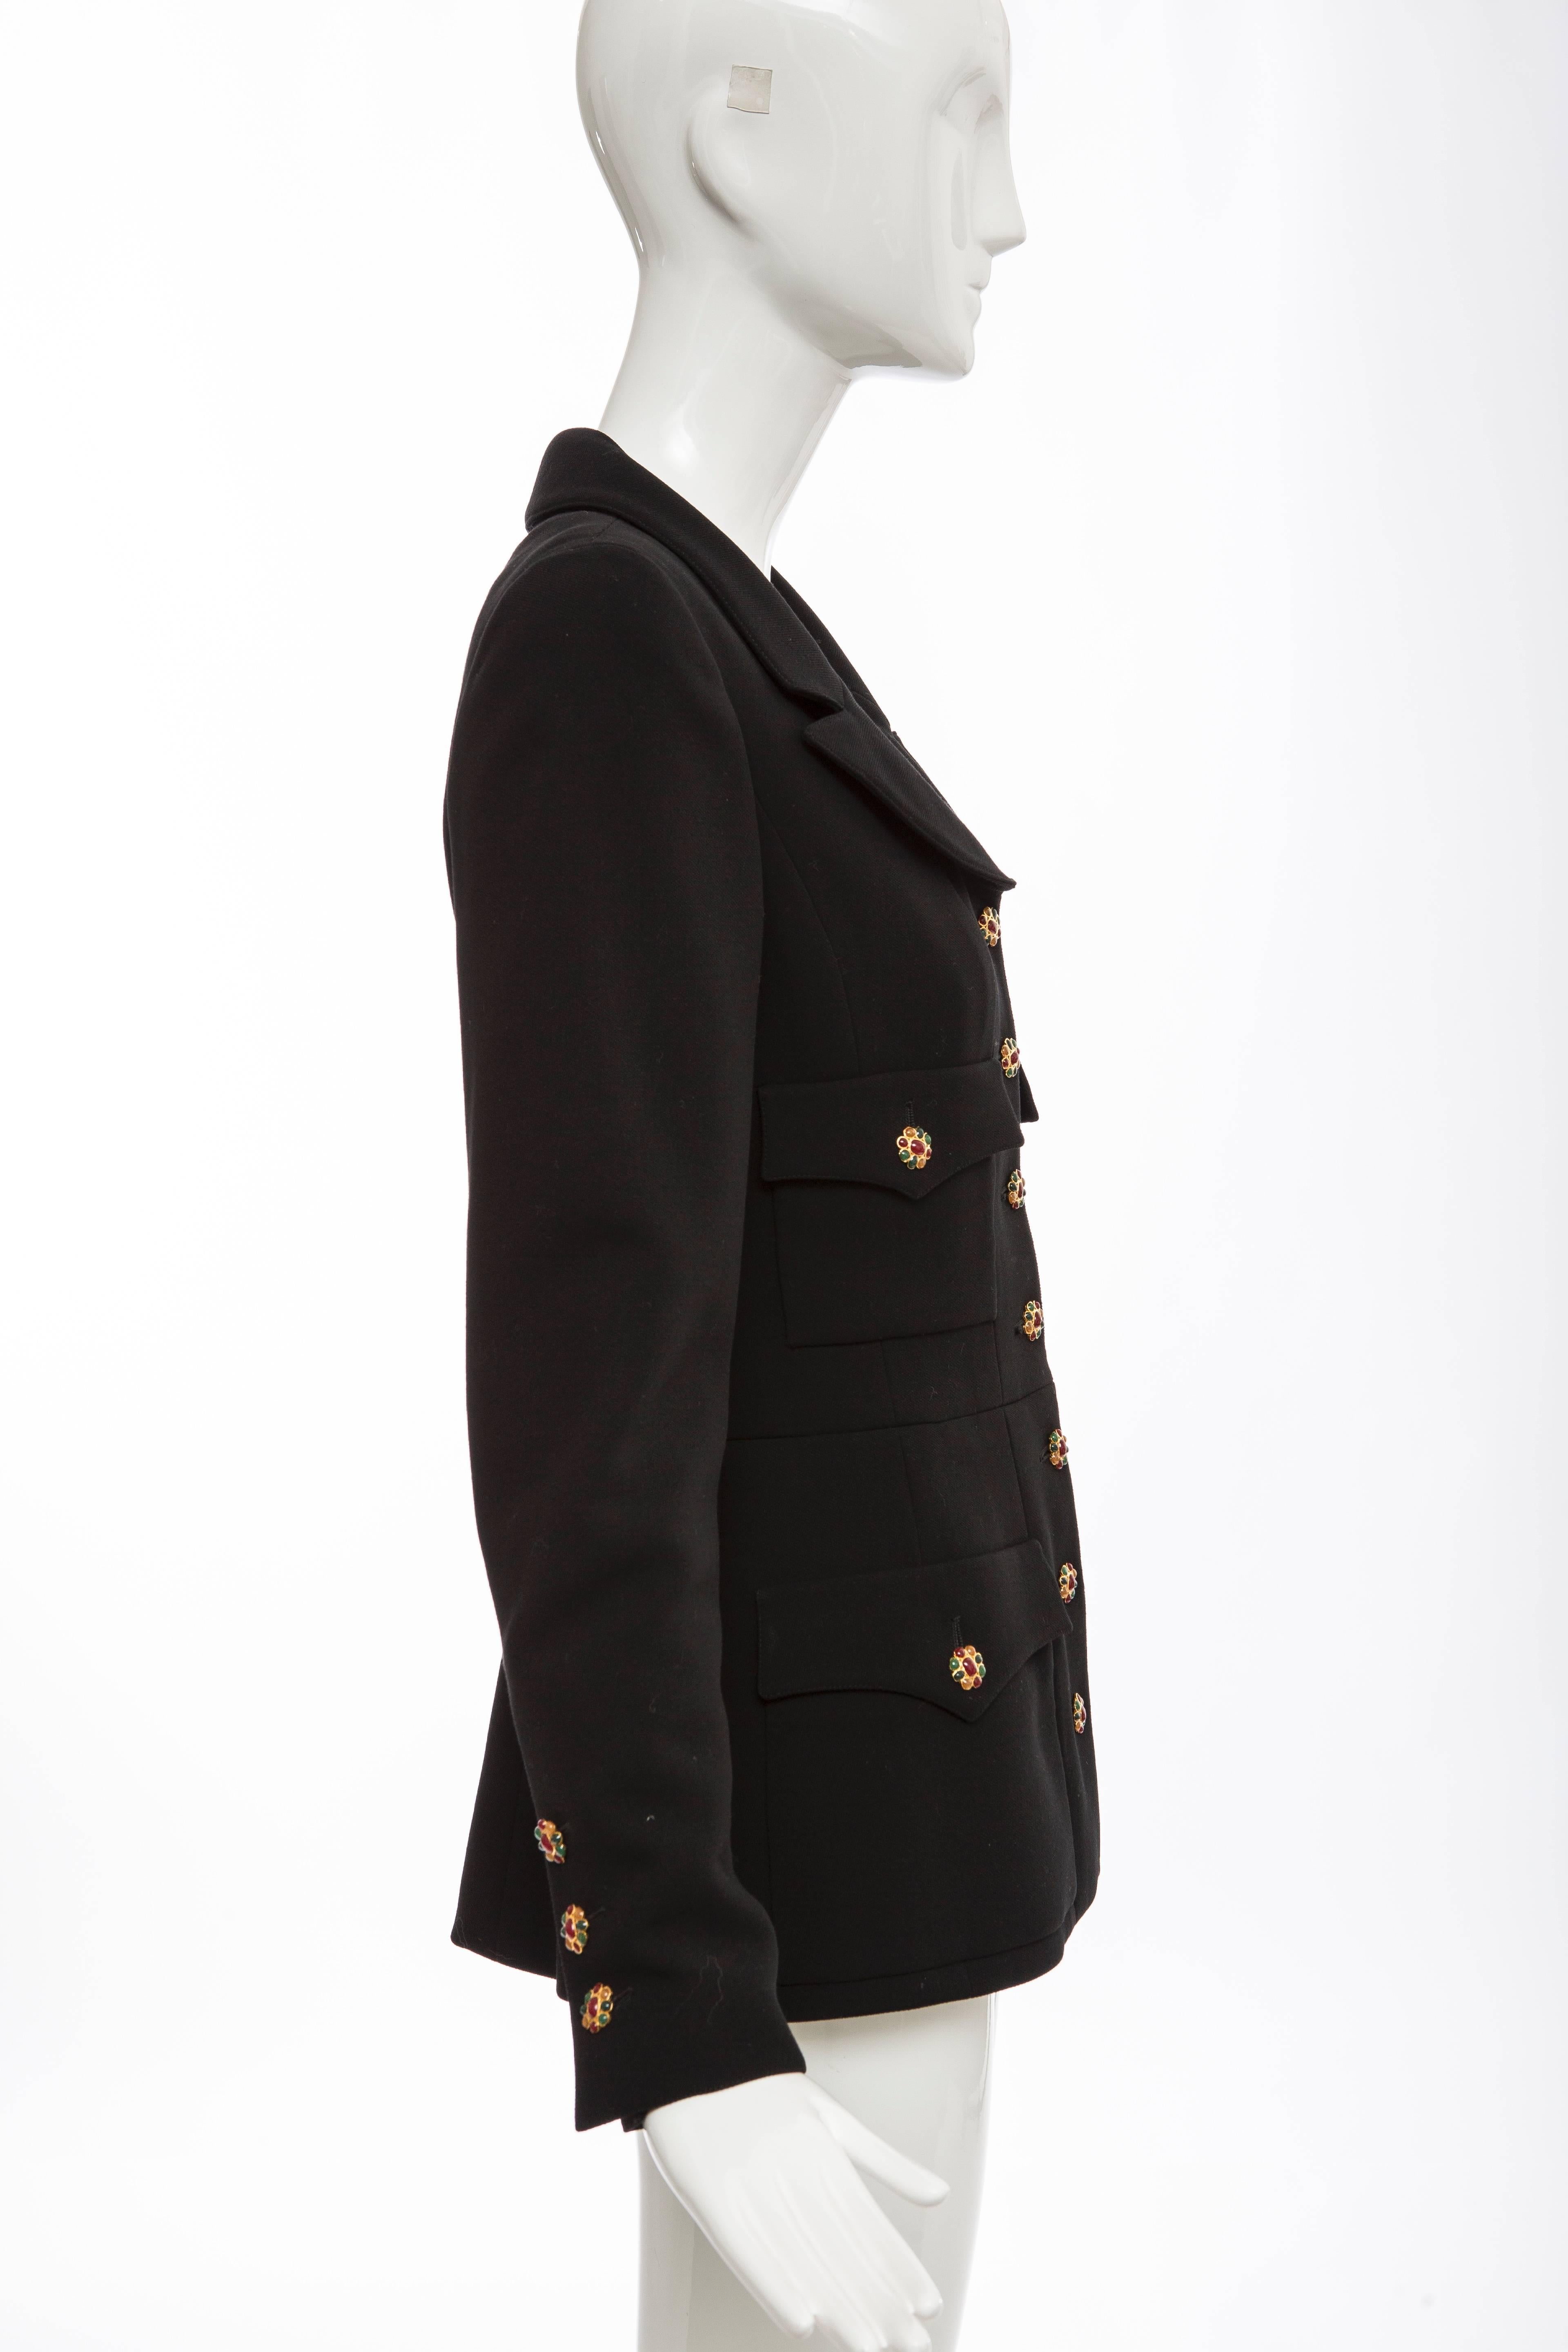 Chanel, Autumn-Winter 1996, black wool jacket featuring structured shoulders, four flap pockets, gold-tone chain link accent at interior hem, gripoix button closures at center front and fully lined in silk.

FR.40
US.8

Bust 36”, Waist 26”, Shoulder